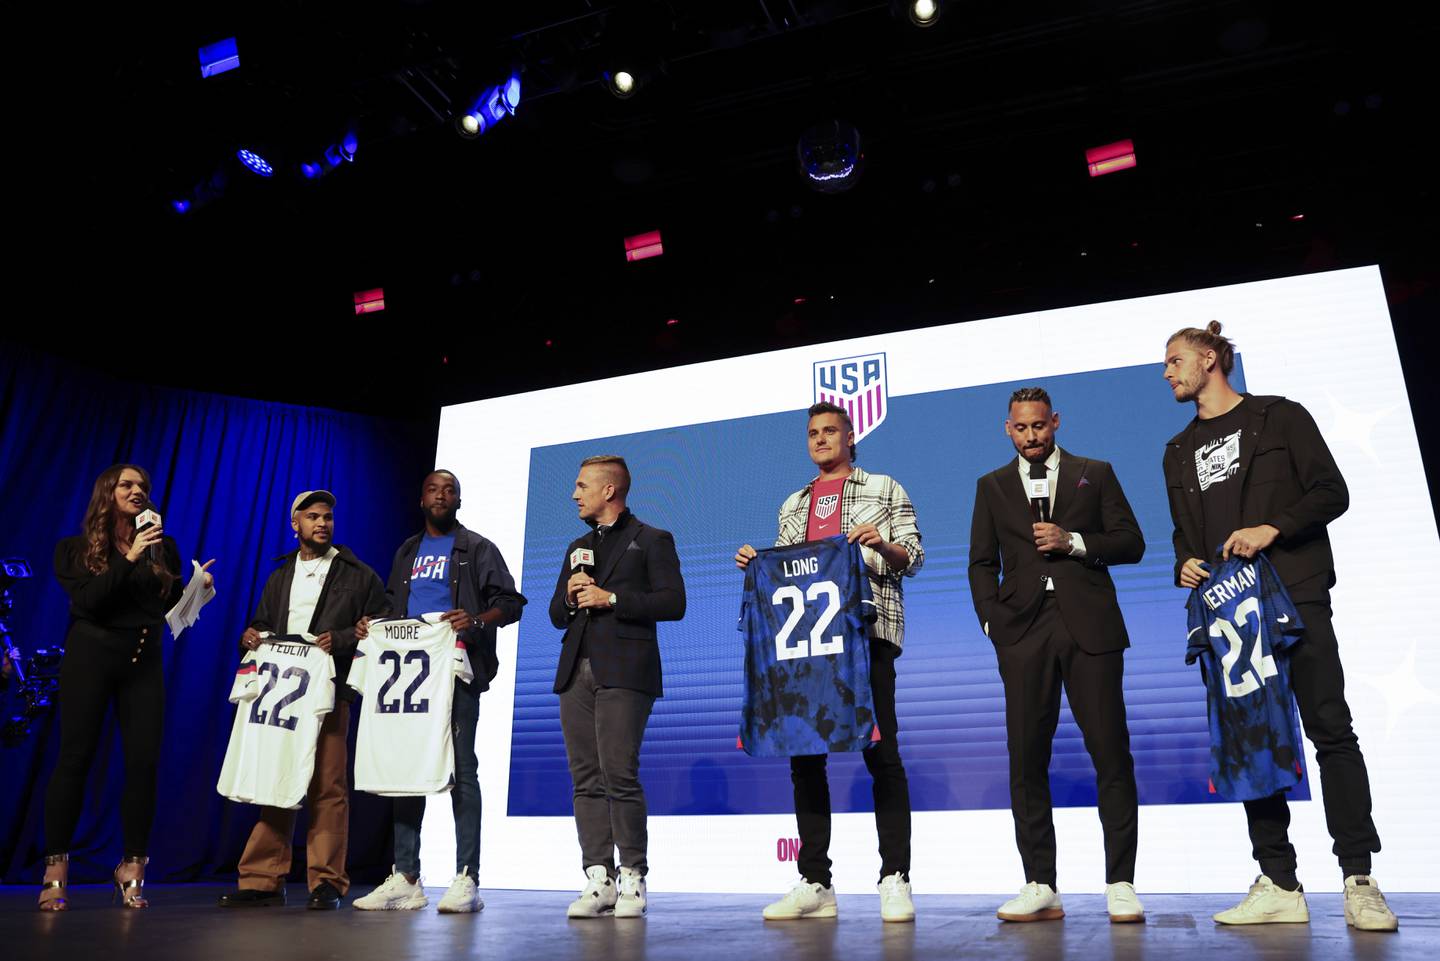 U.S. defenders DeAndre Yedlin, Shaq Moore, Aaron Long and Walker Zimmerman hold up jerseys after being named to the U.S. roster for the World Cup in Qatar on Nov. 9, 2022, in New York.